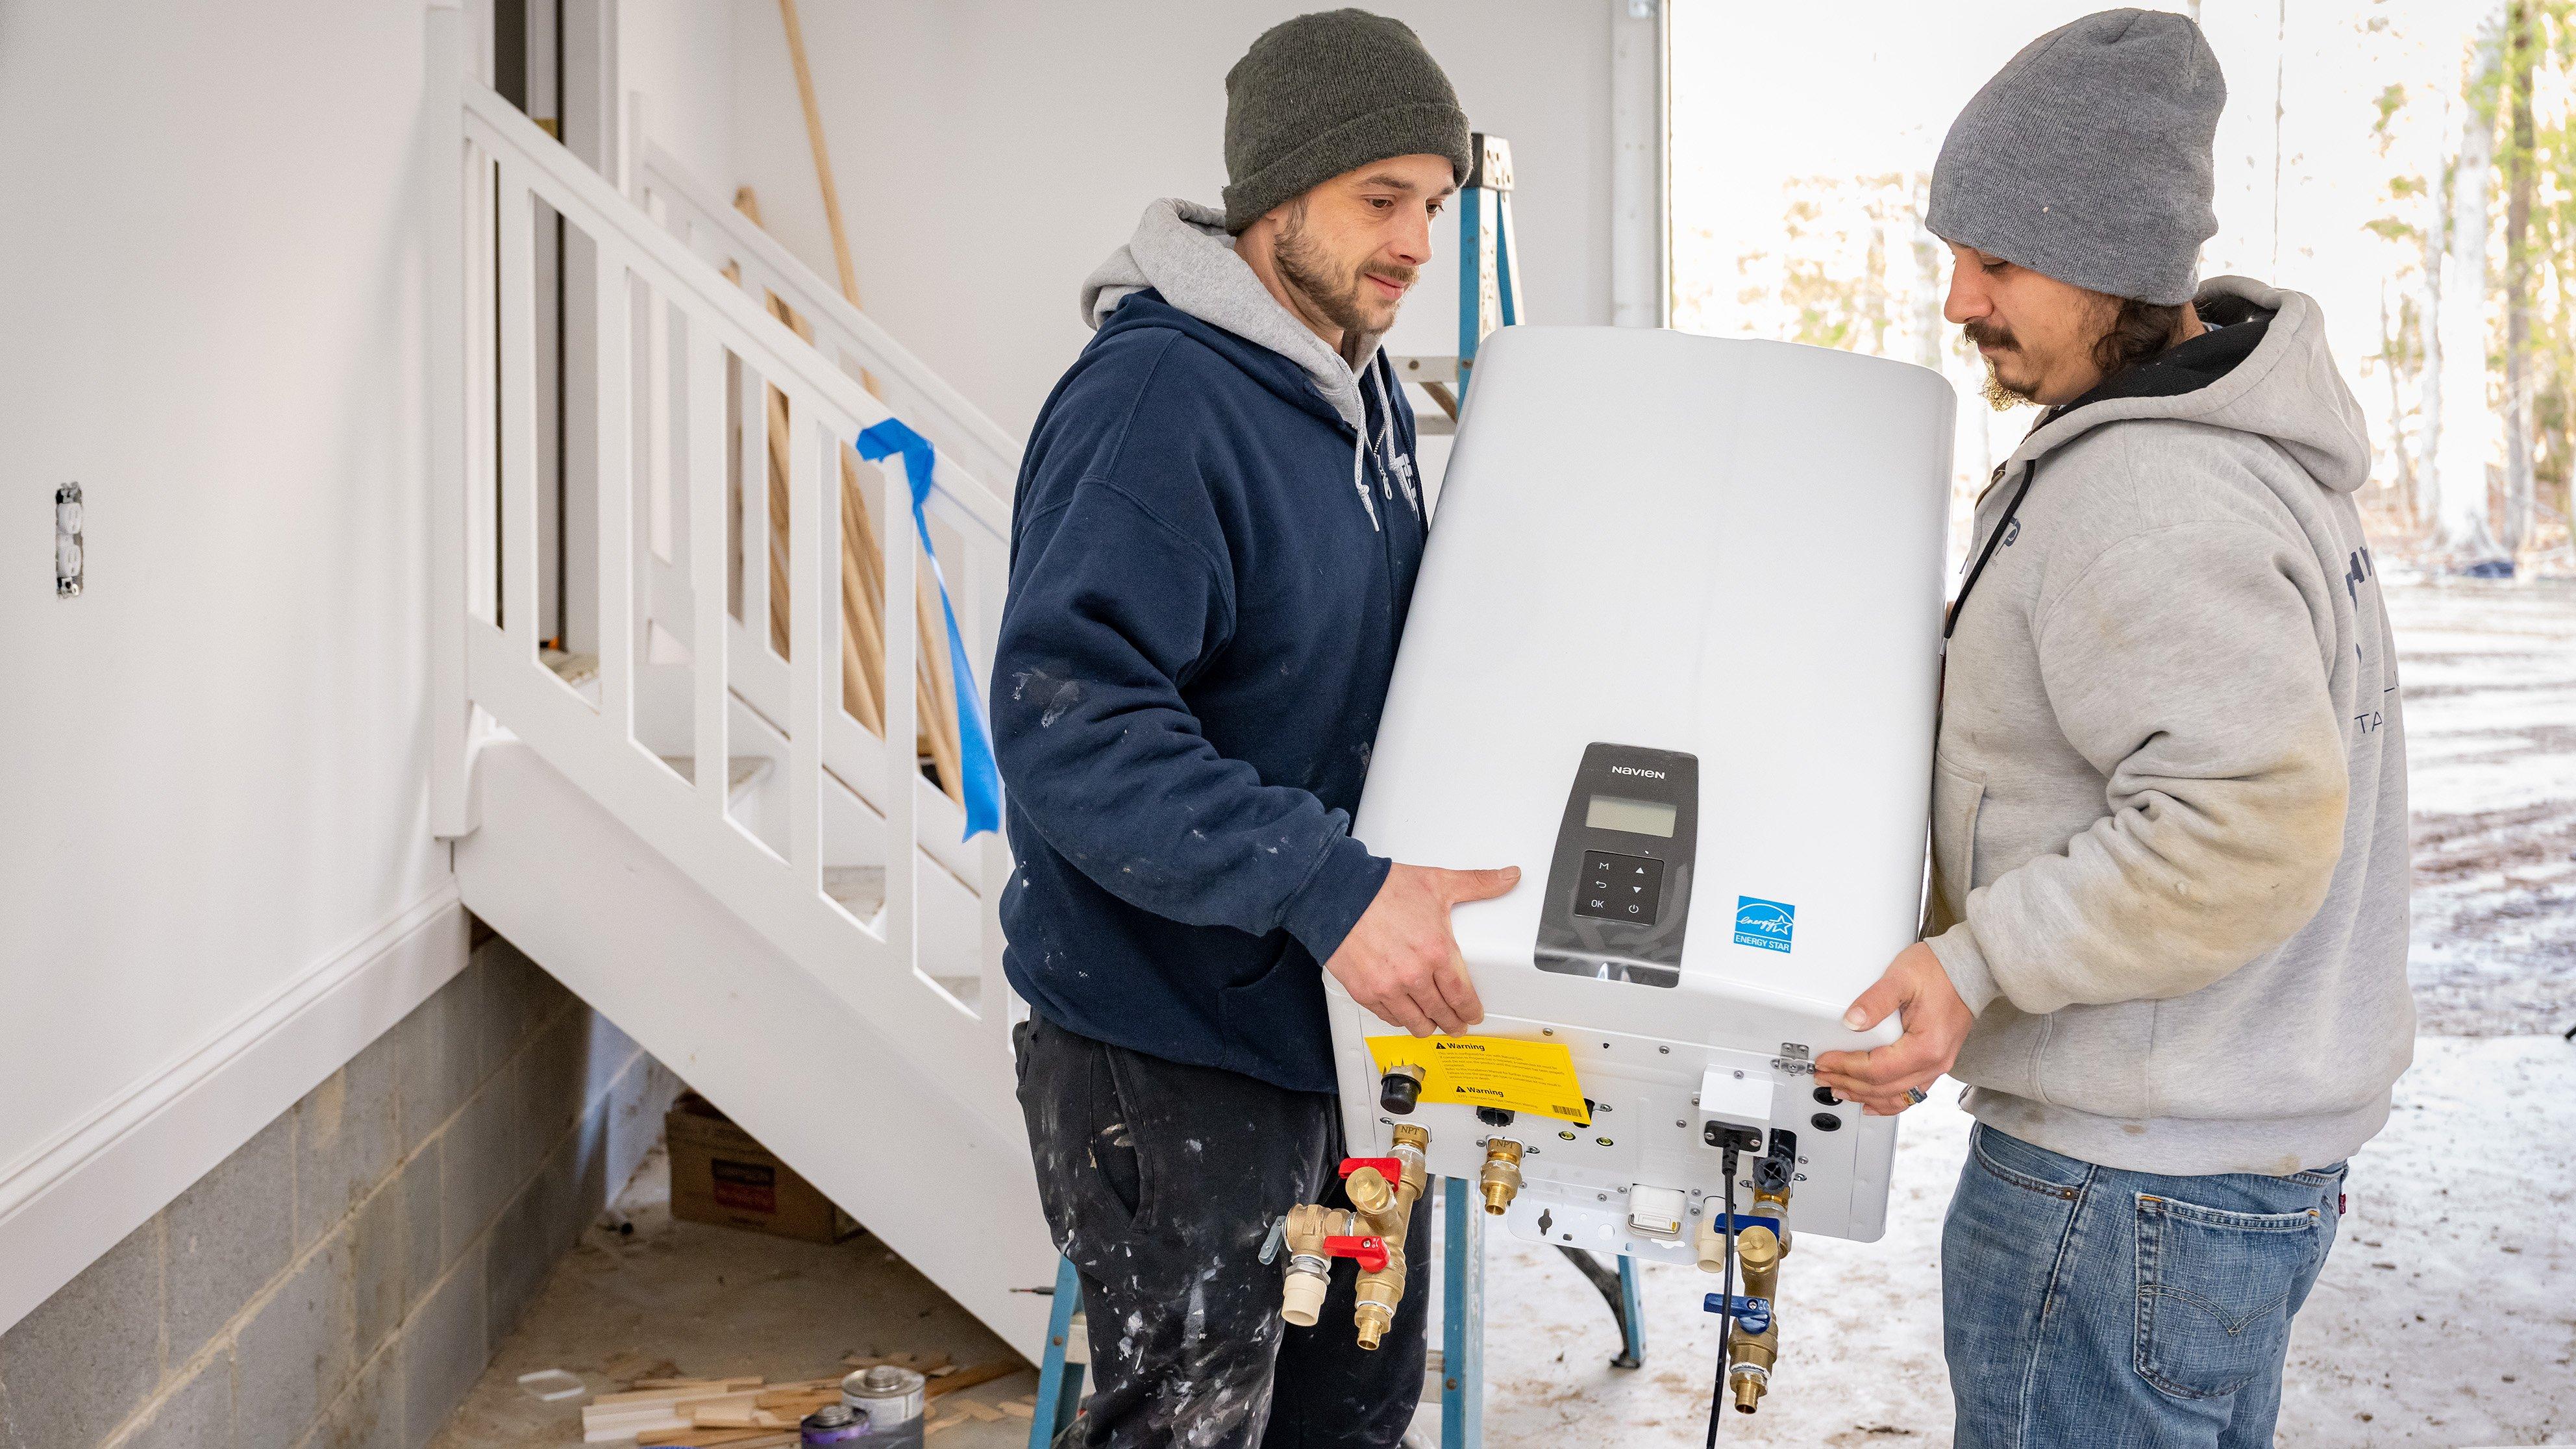 Two contractors carry an EnergyStar water heater in a home’s garage.